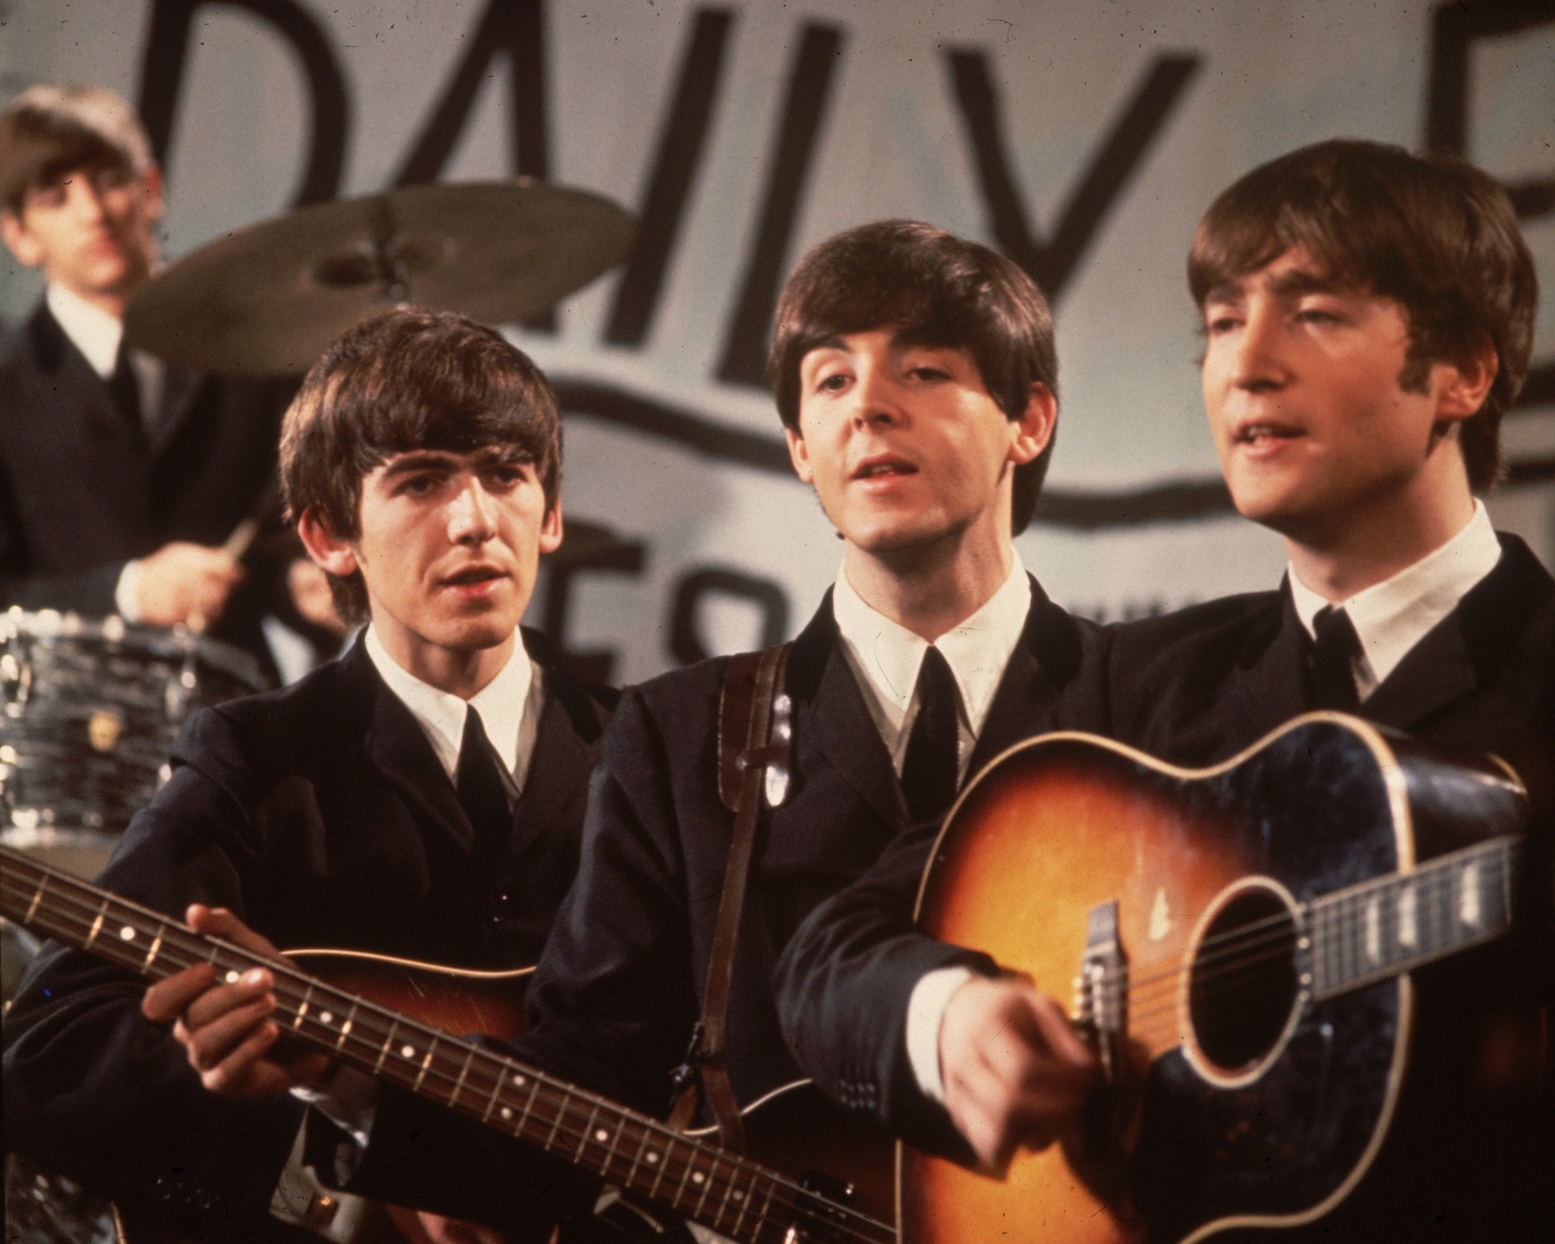 Ringo Starr, George Harrison, Paul McCartney, and John Lennon perform on Granada TV's Late Scene Extra television show in Manchester, England